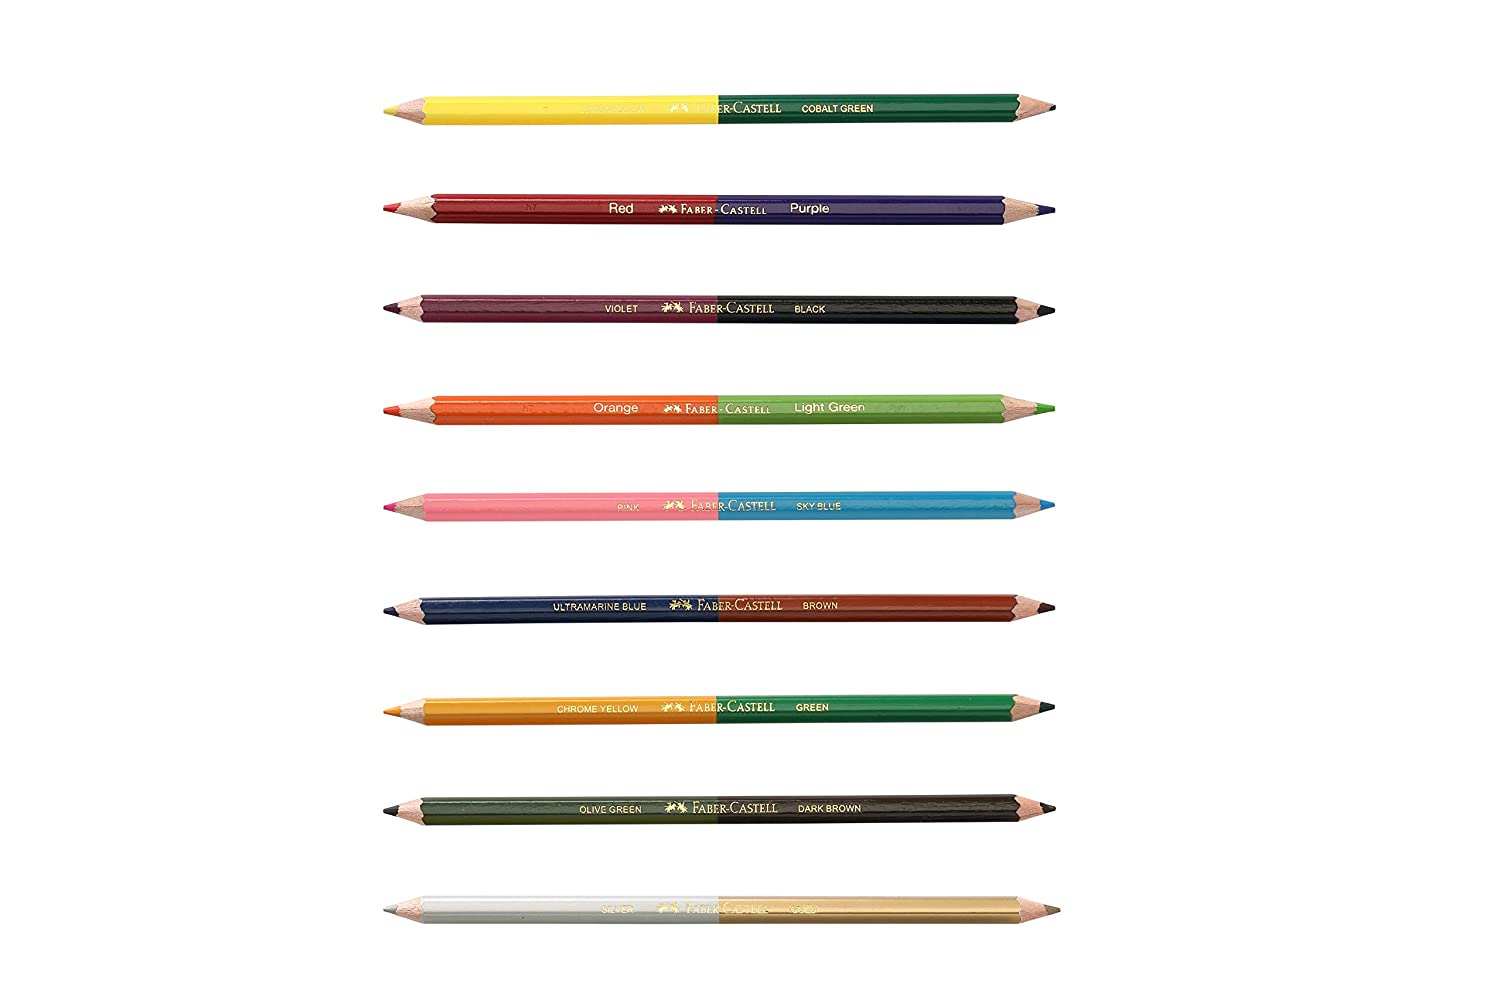 Staedtler 175 M72 Coloured Pencils - Assorted Colours (Tin of 72)